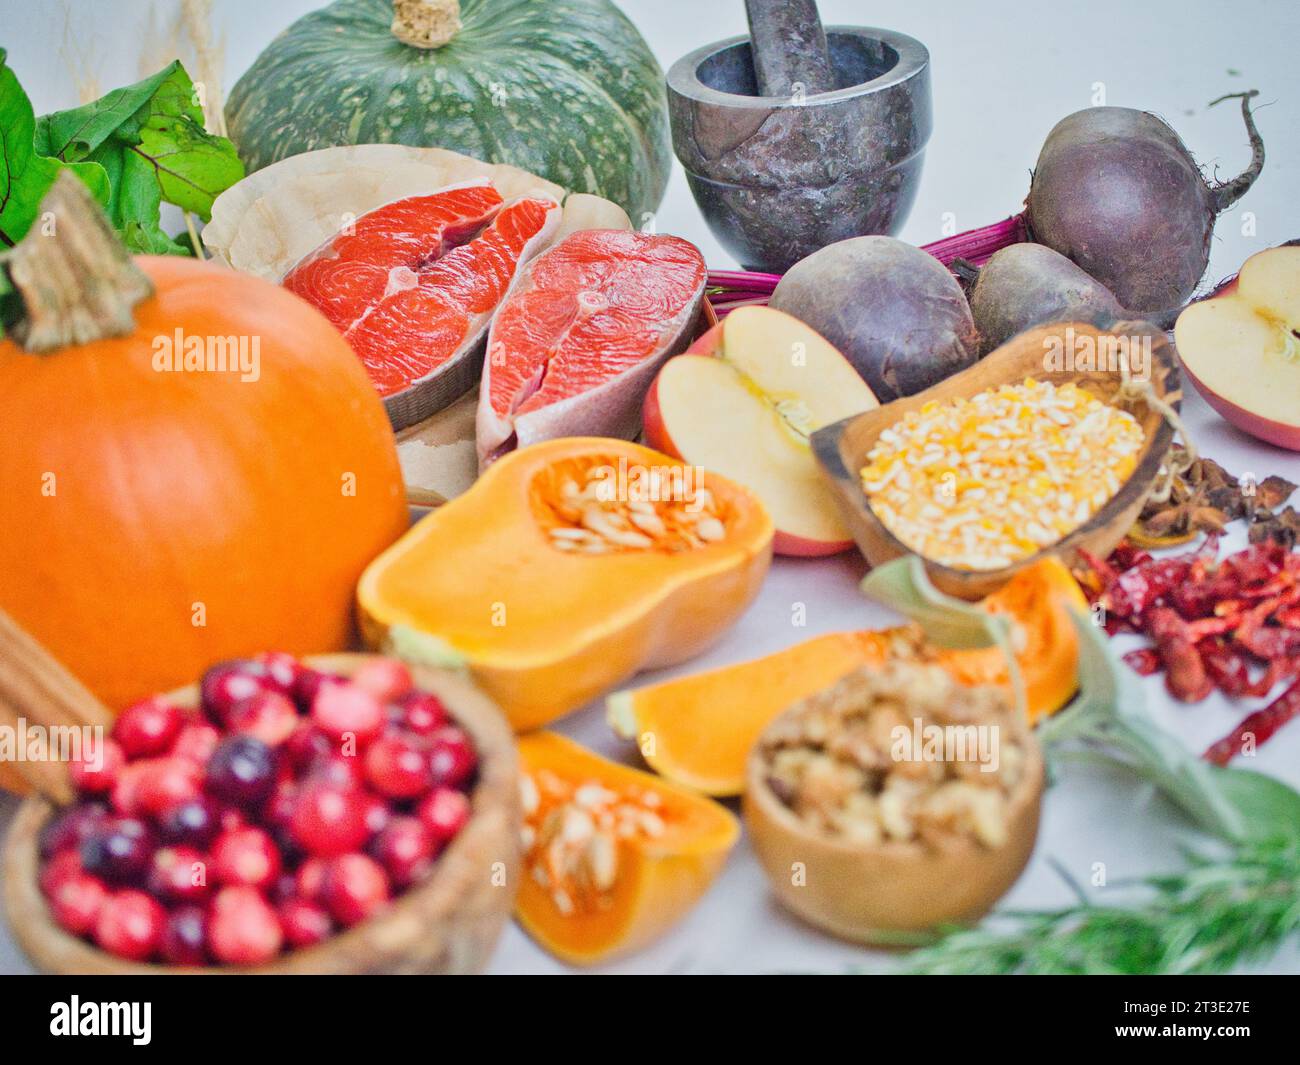 Colorful still life array of beautiful fall vegetable ingredients with sockeye salmon steaks for healthy eating or meatless, thanksgiving with fish. Stock Photo